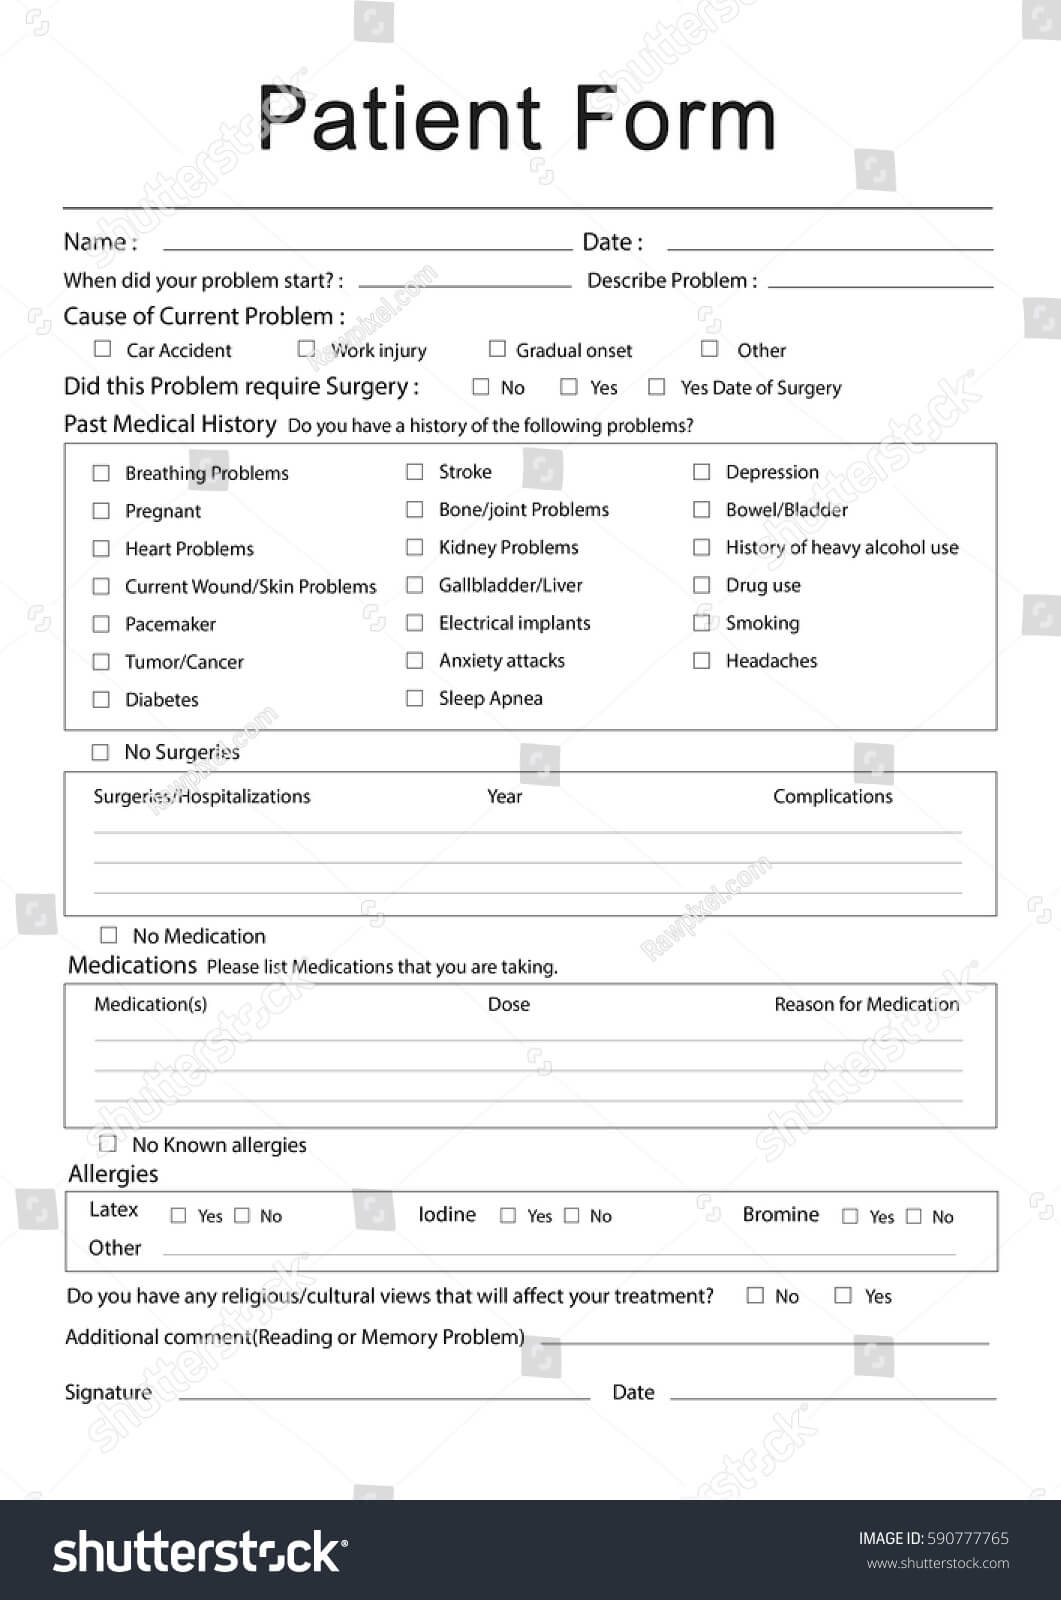 Cv Template Word Norsk | Resume Pdf Download Inside Patient Report Form Template Download